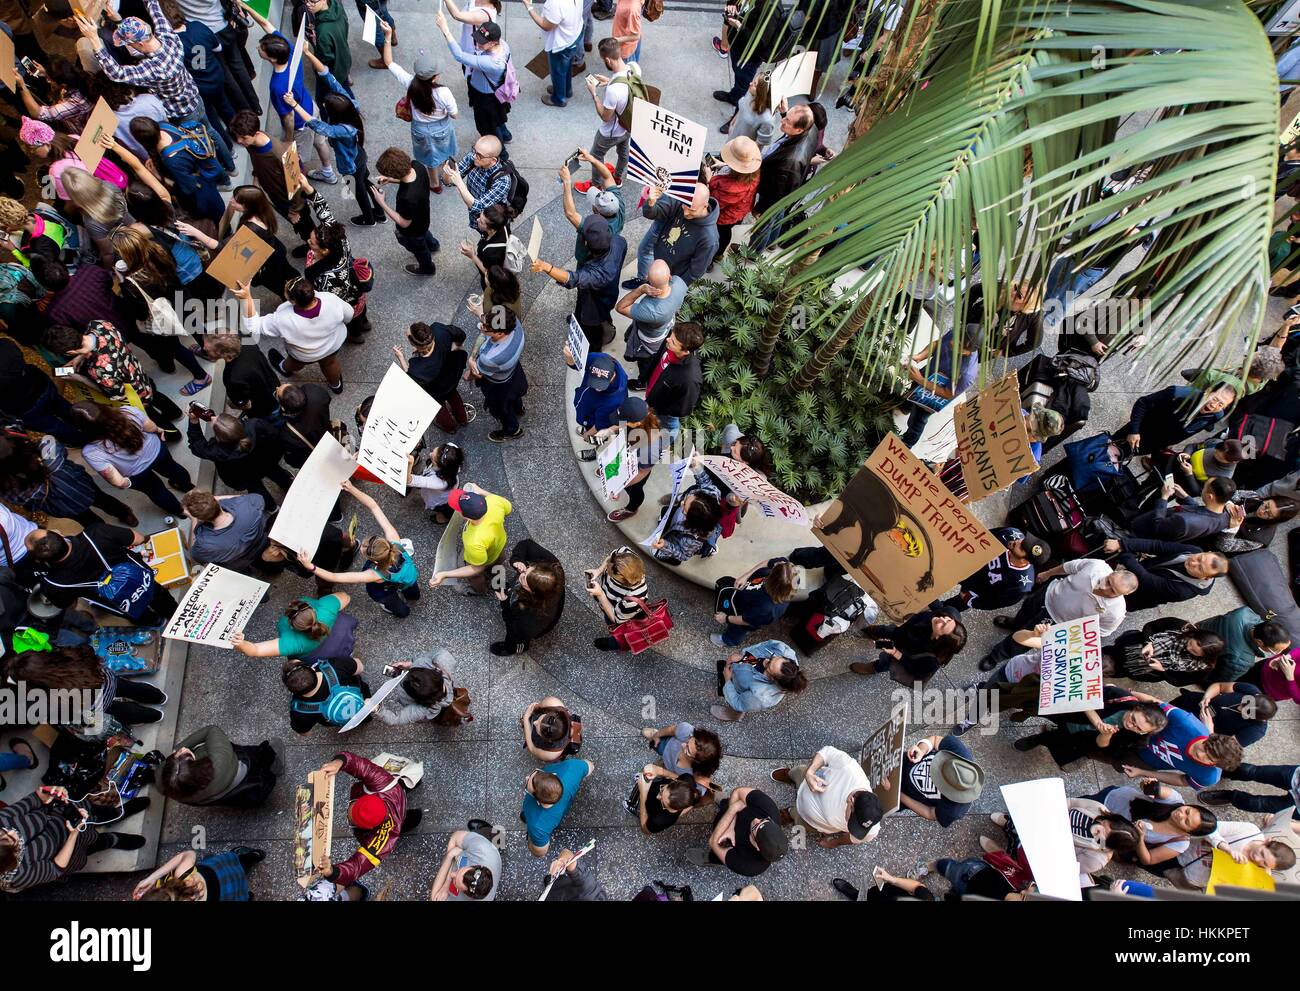 Los Angeles, USA. 29th Jan, 2017. For the second day in a row, people gather at the Tom Bradley International Terminal at Los Angeles International Airport to protest President Trump's executive order on immigration. Signed two days ago, the order barred the entry of all refugees to the United States for the next 120 days and for 90 days for citizens of seven predominantly Muslim countries. Credit: Brian Cahn/ZUMA Wire/Alamy Live News Stock Photo